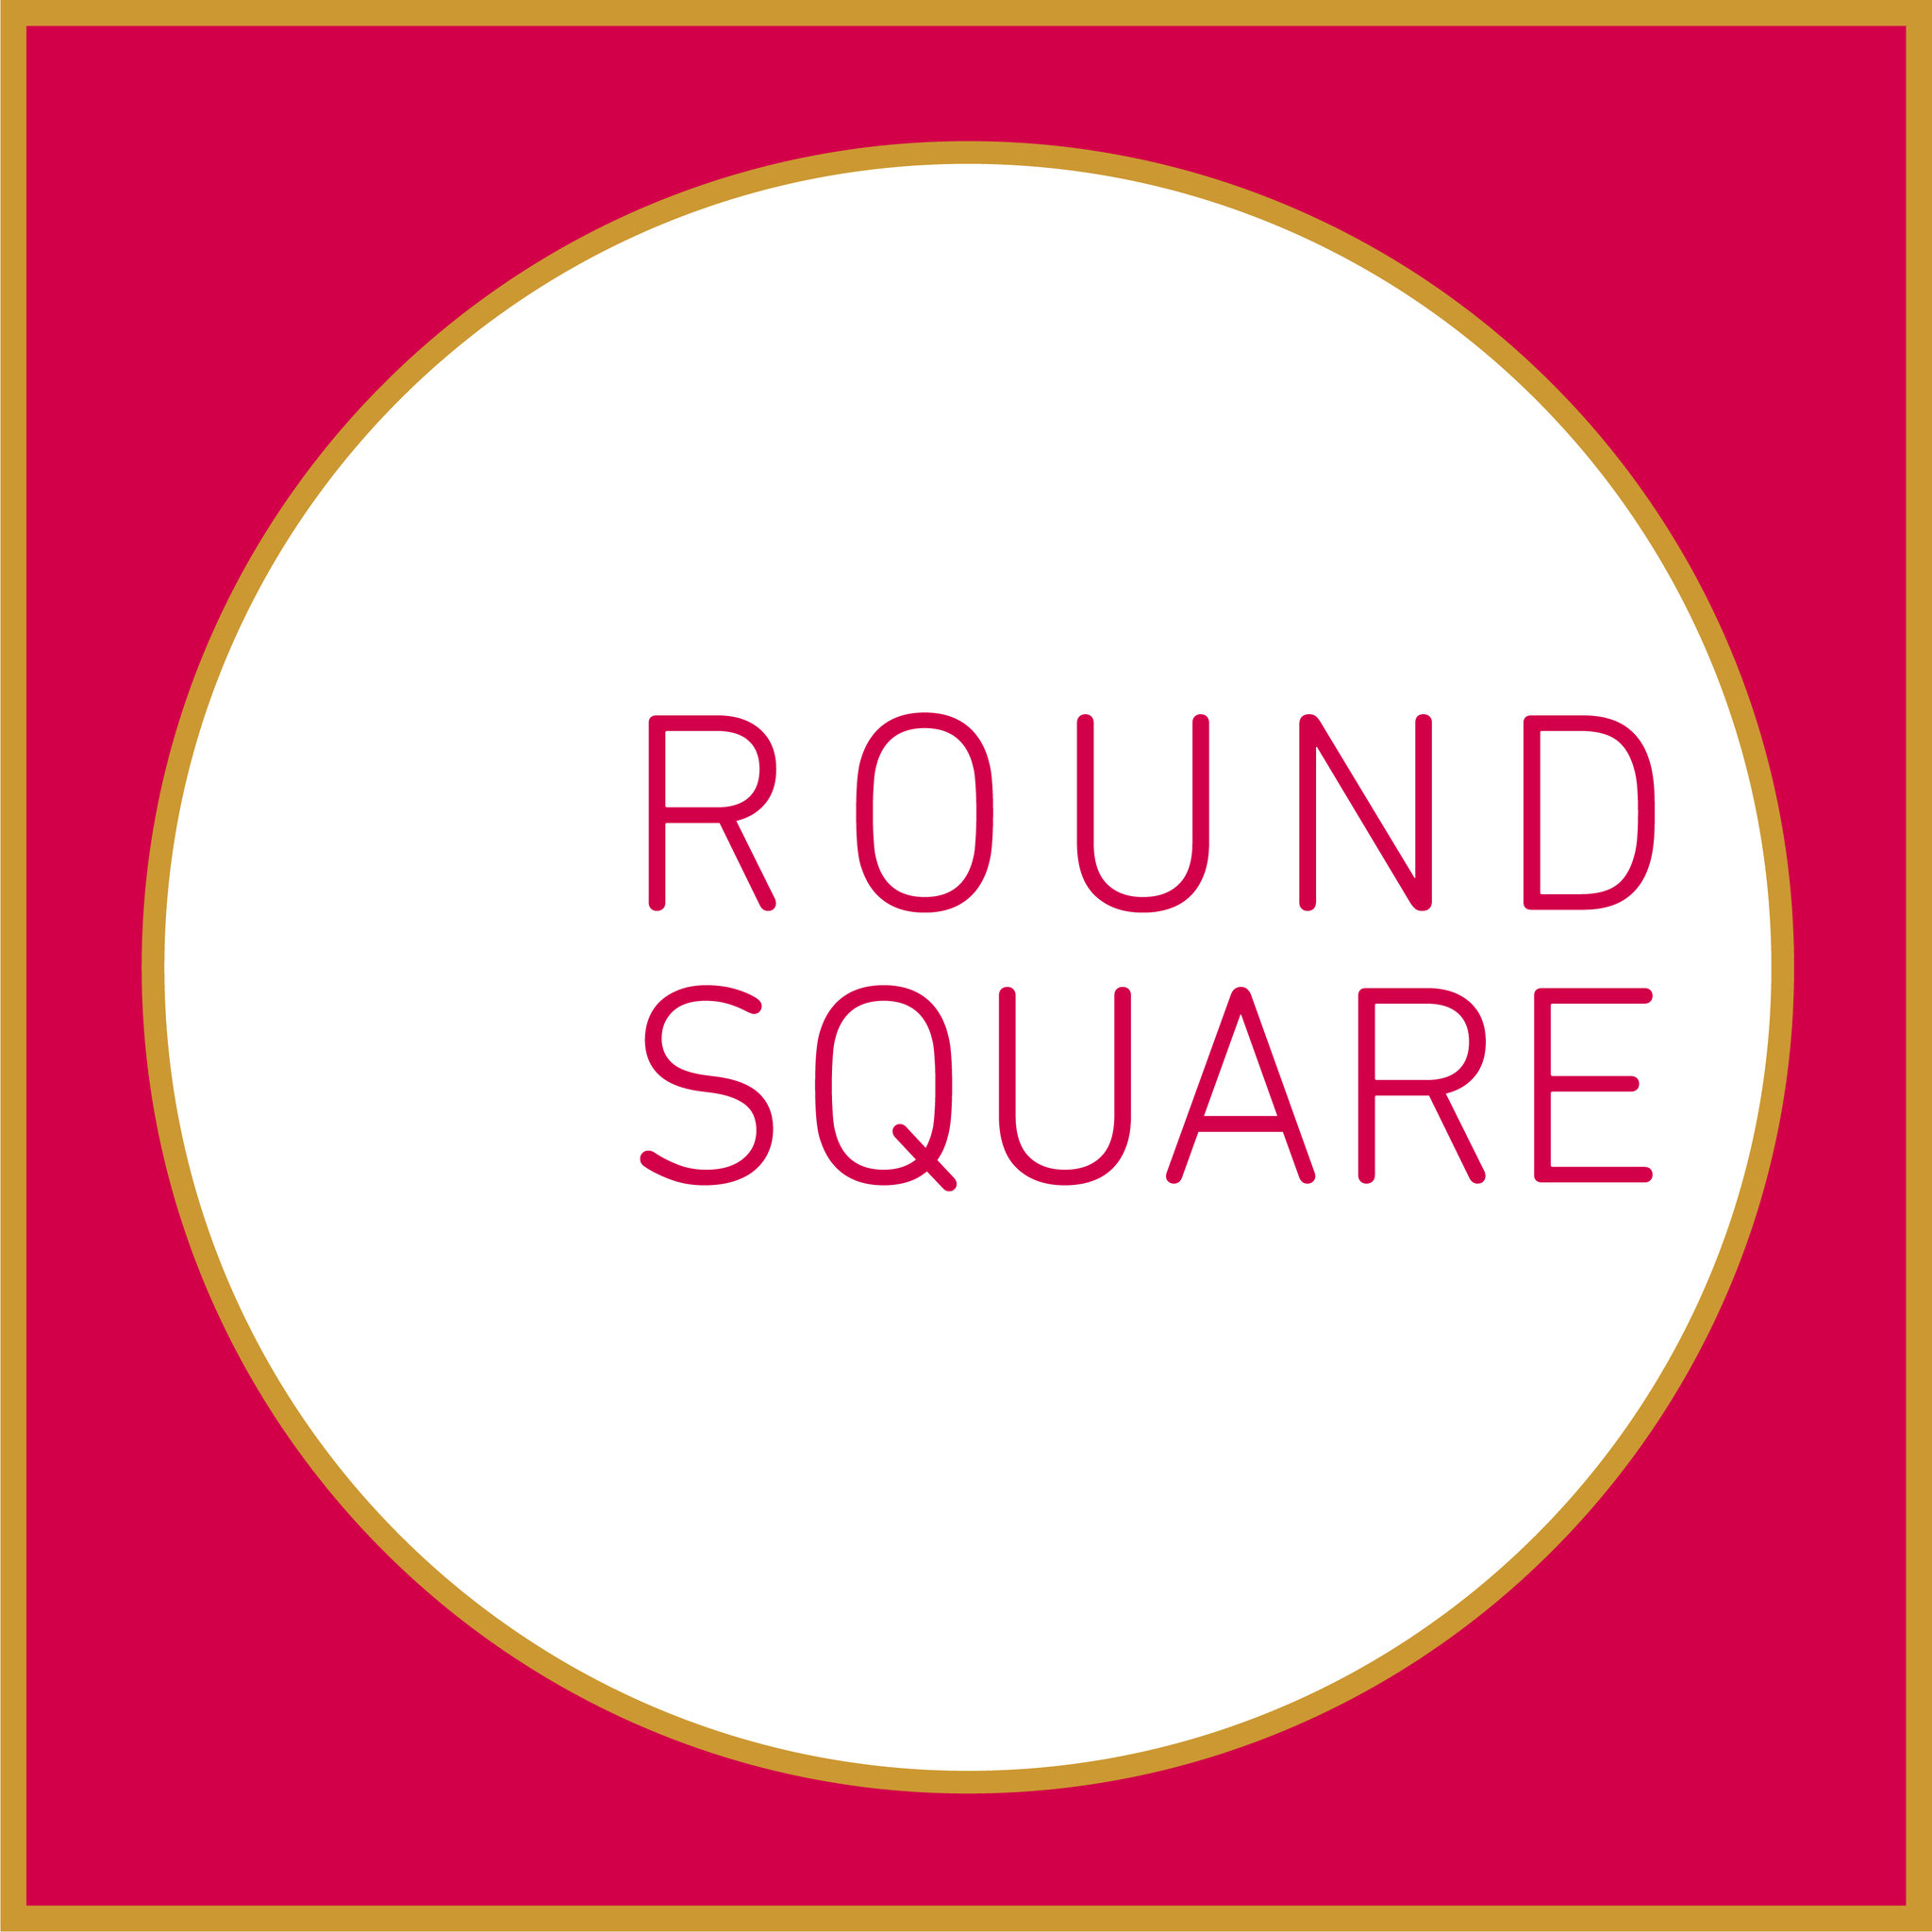 Round Square Today ∆